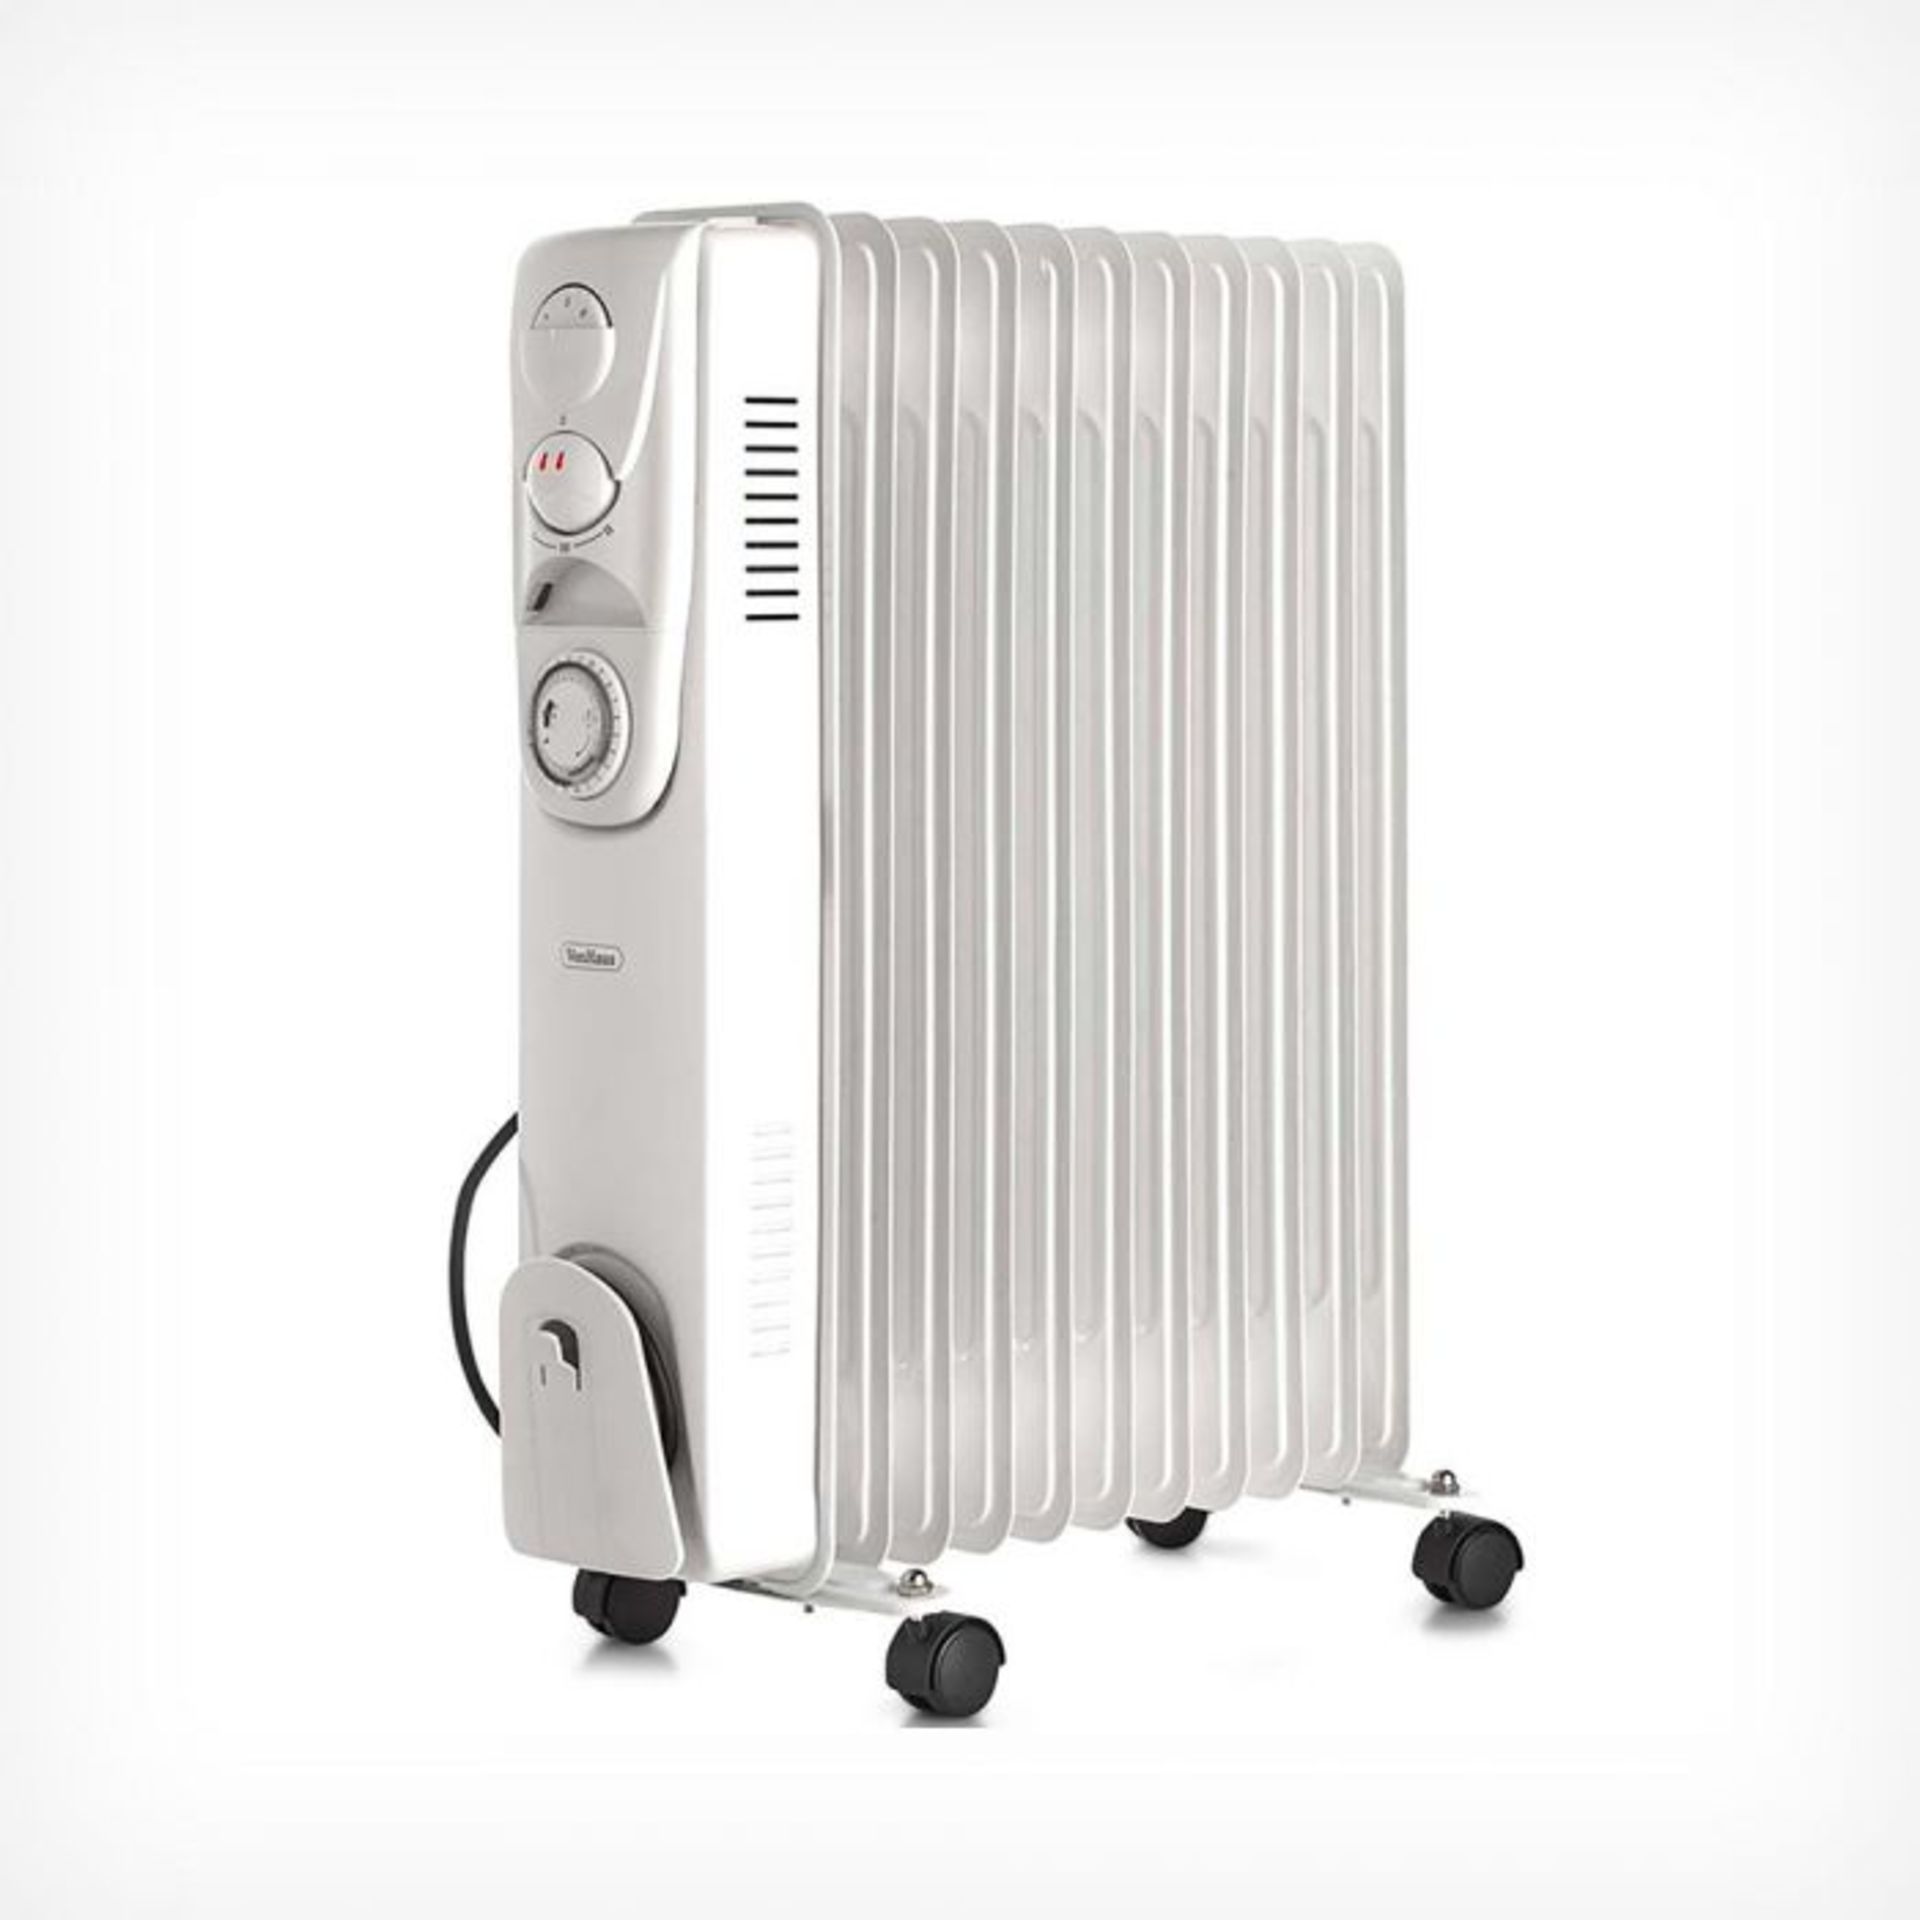 (S13) 11 Fin 2500W Oil Filled Radiator - White Suitable for areas up to 28 square metres 3 po... - Image 3 of 4